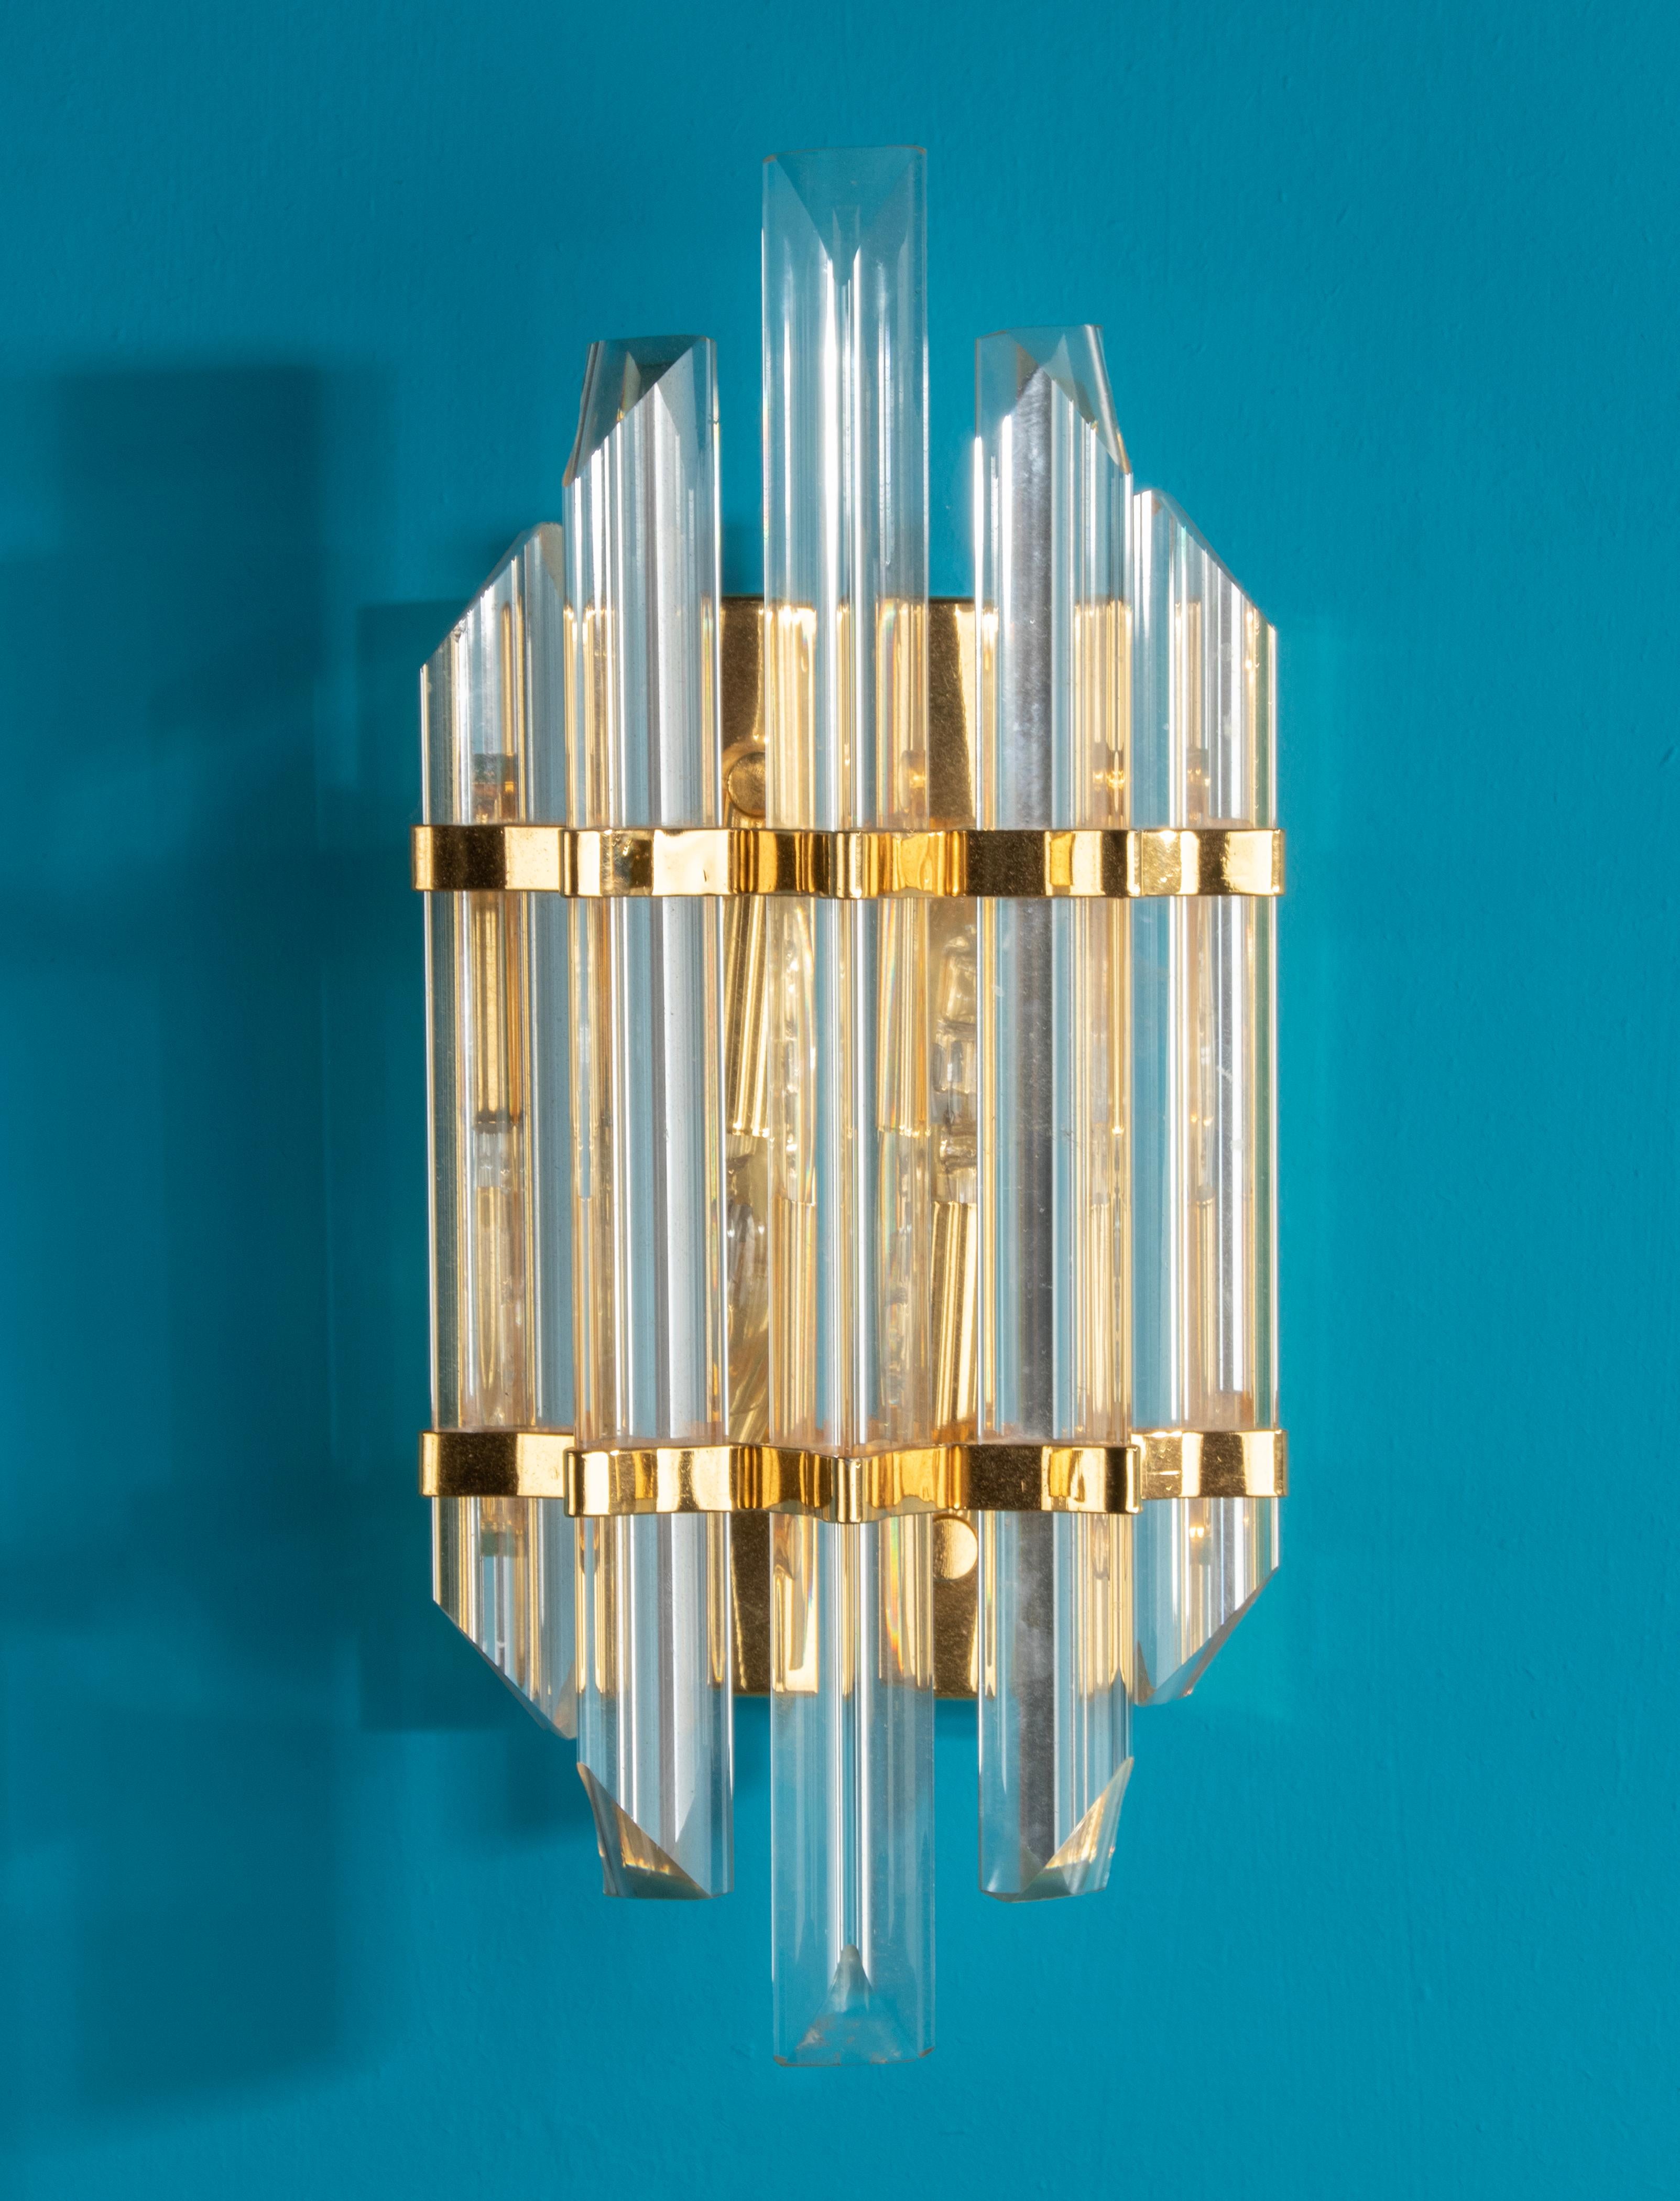 Beautiful Mid-Century Modern wall light, decorated with crystal prism shaped cones. Made in Italy, around 1960-1970. The fixture is made of metal with a brass polished finish.
When the light is on, this gives a beautiful and warm atmospheric